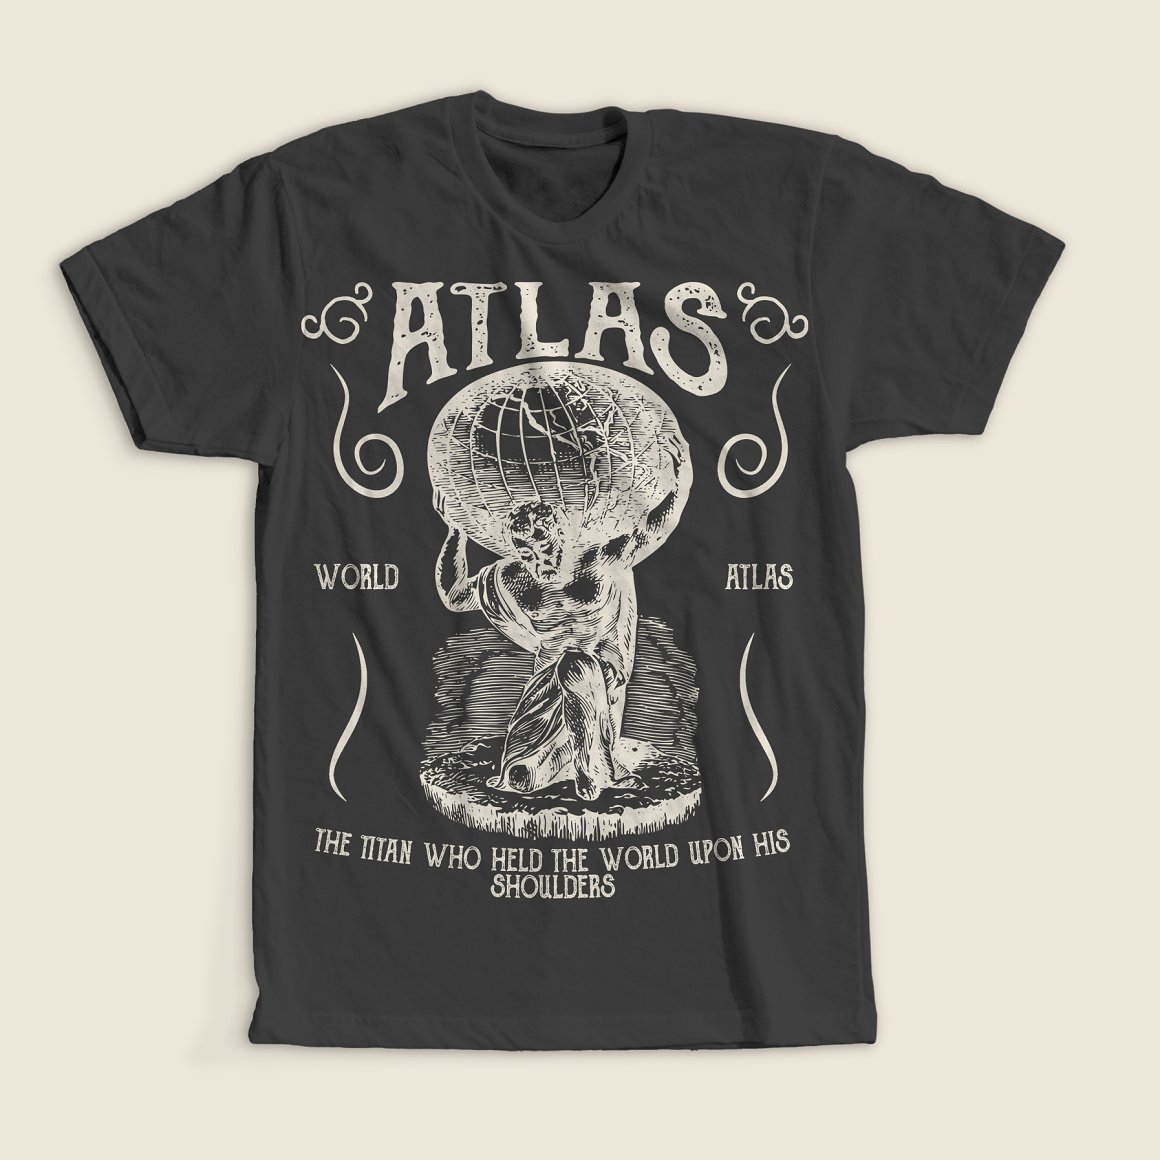 White image of a mythical character - Titan with the lettering "Atlas" on black t-shirt.